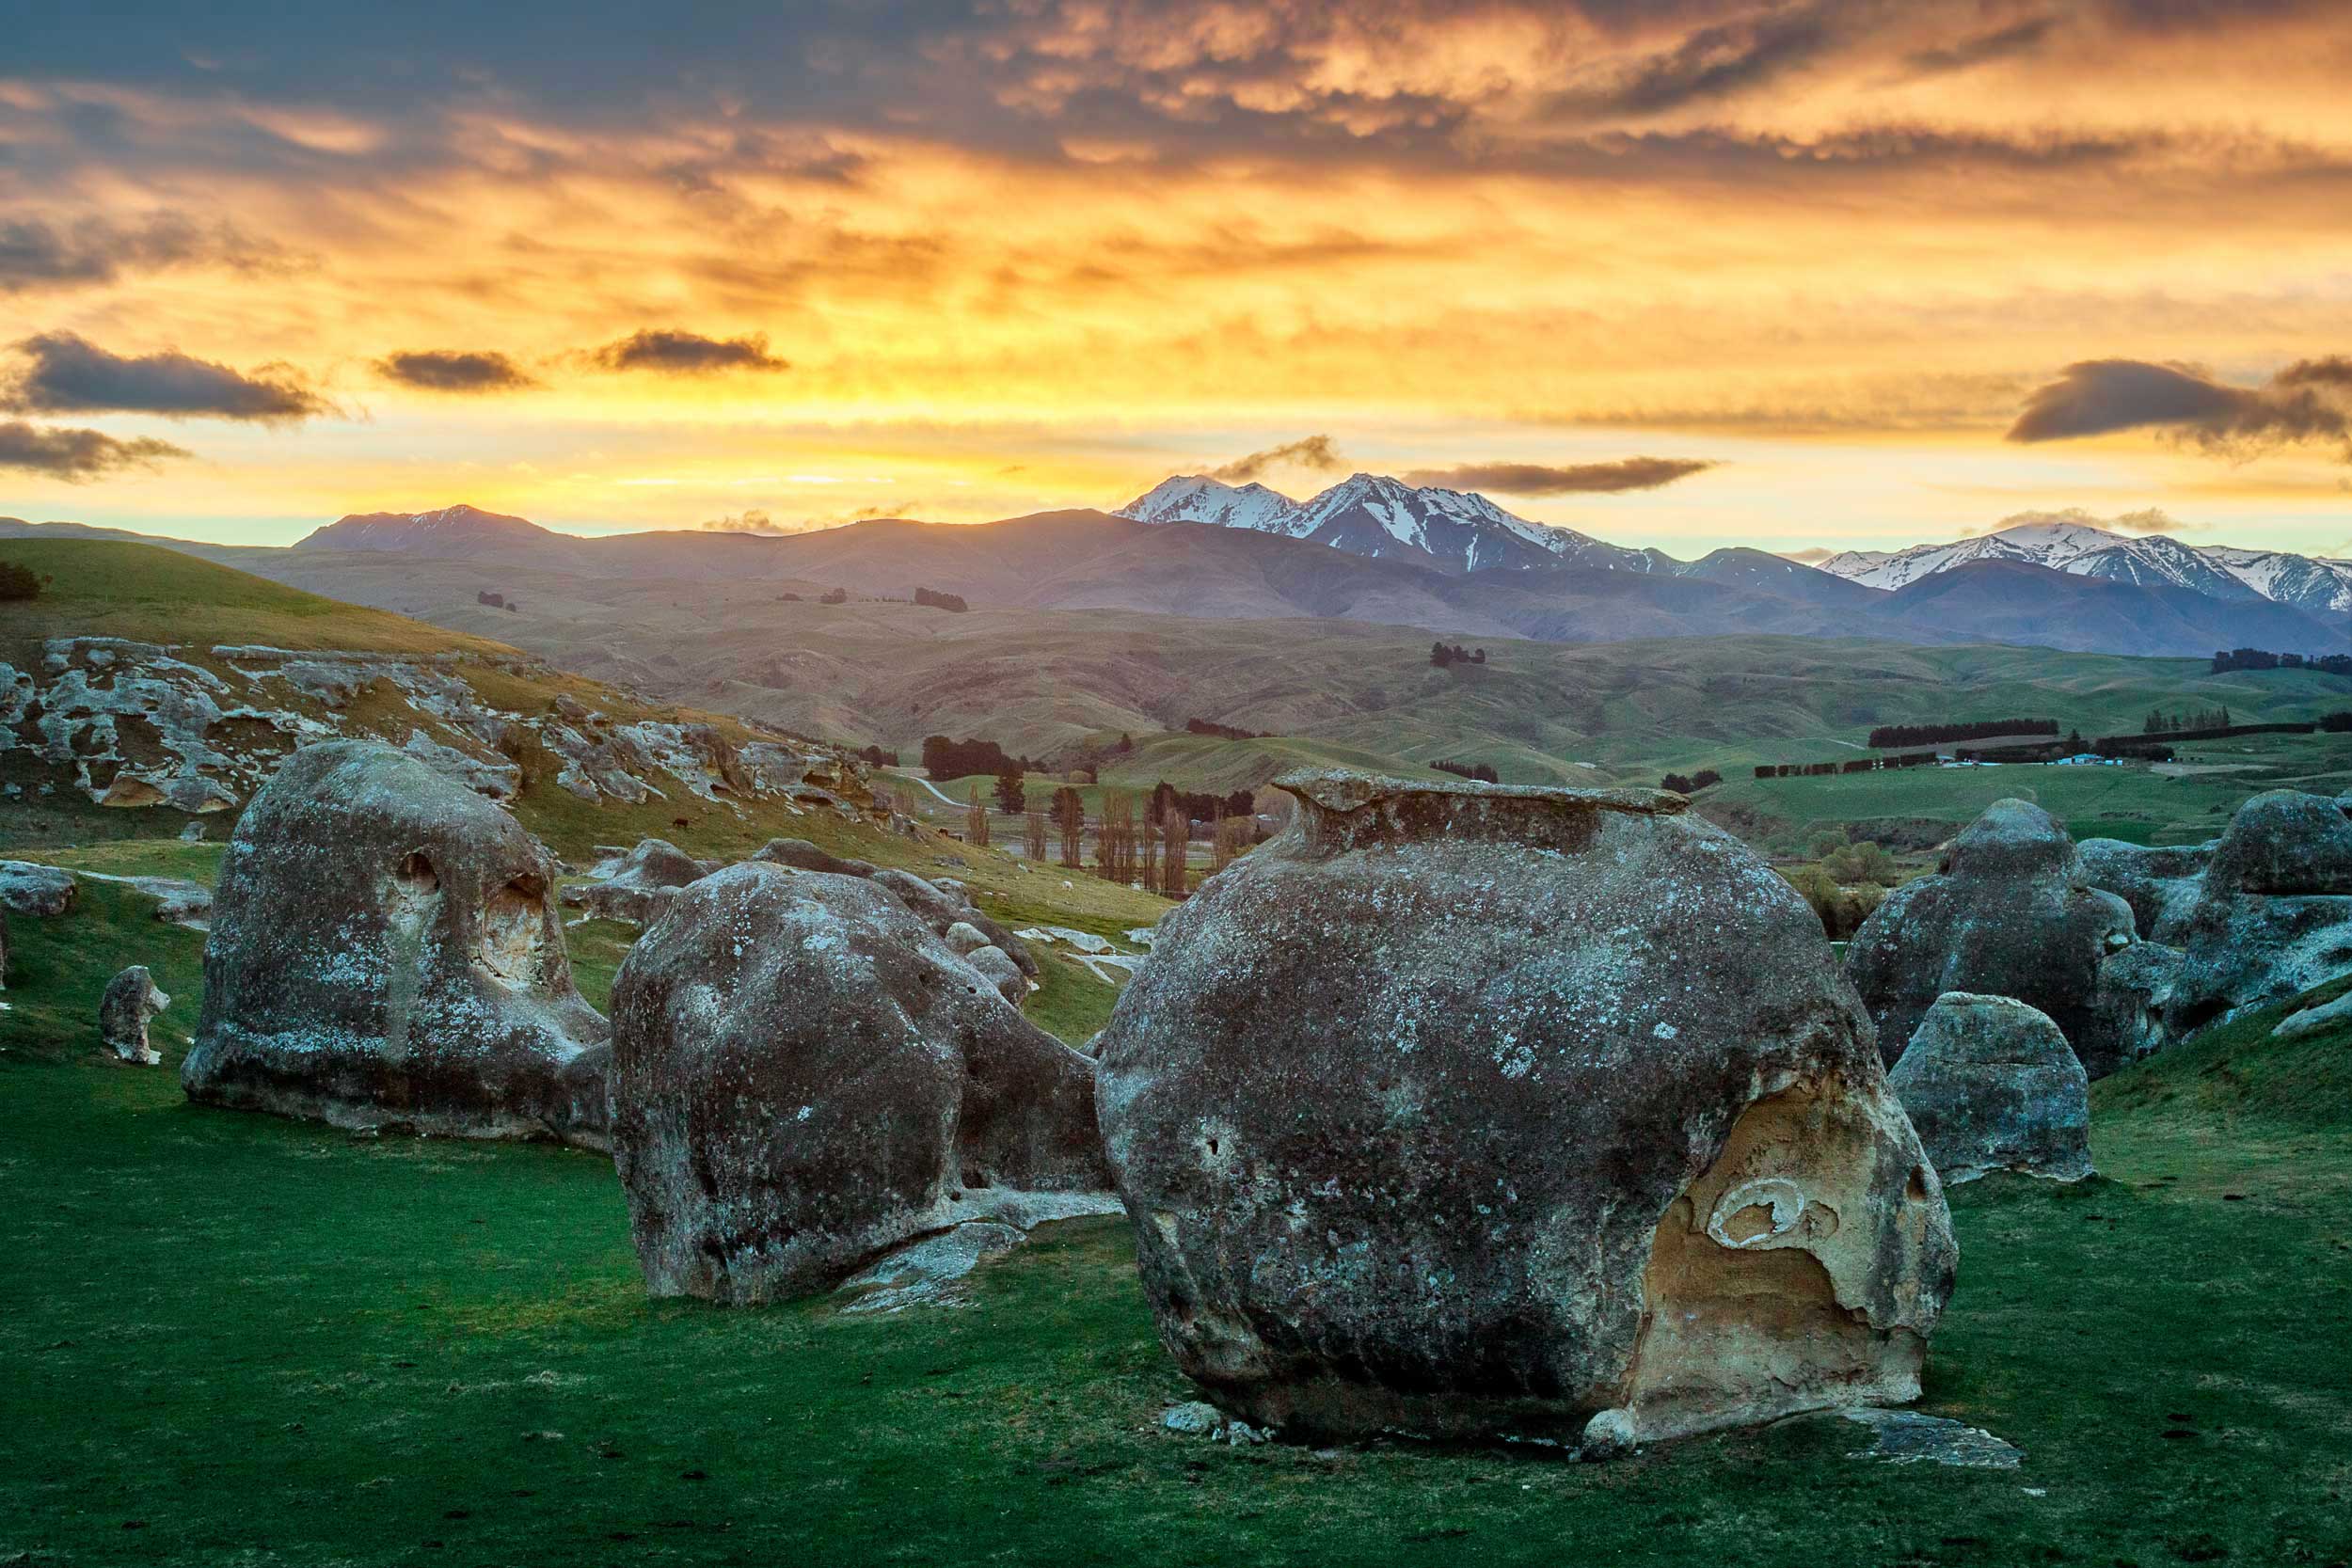 Huge boulders in a green field with a bright yellow sky, South Island, New Zealand